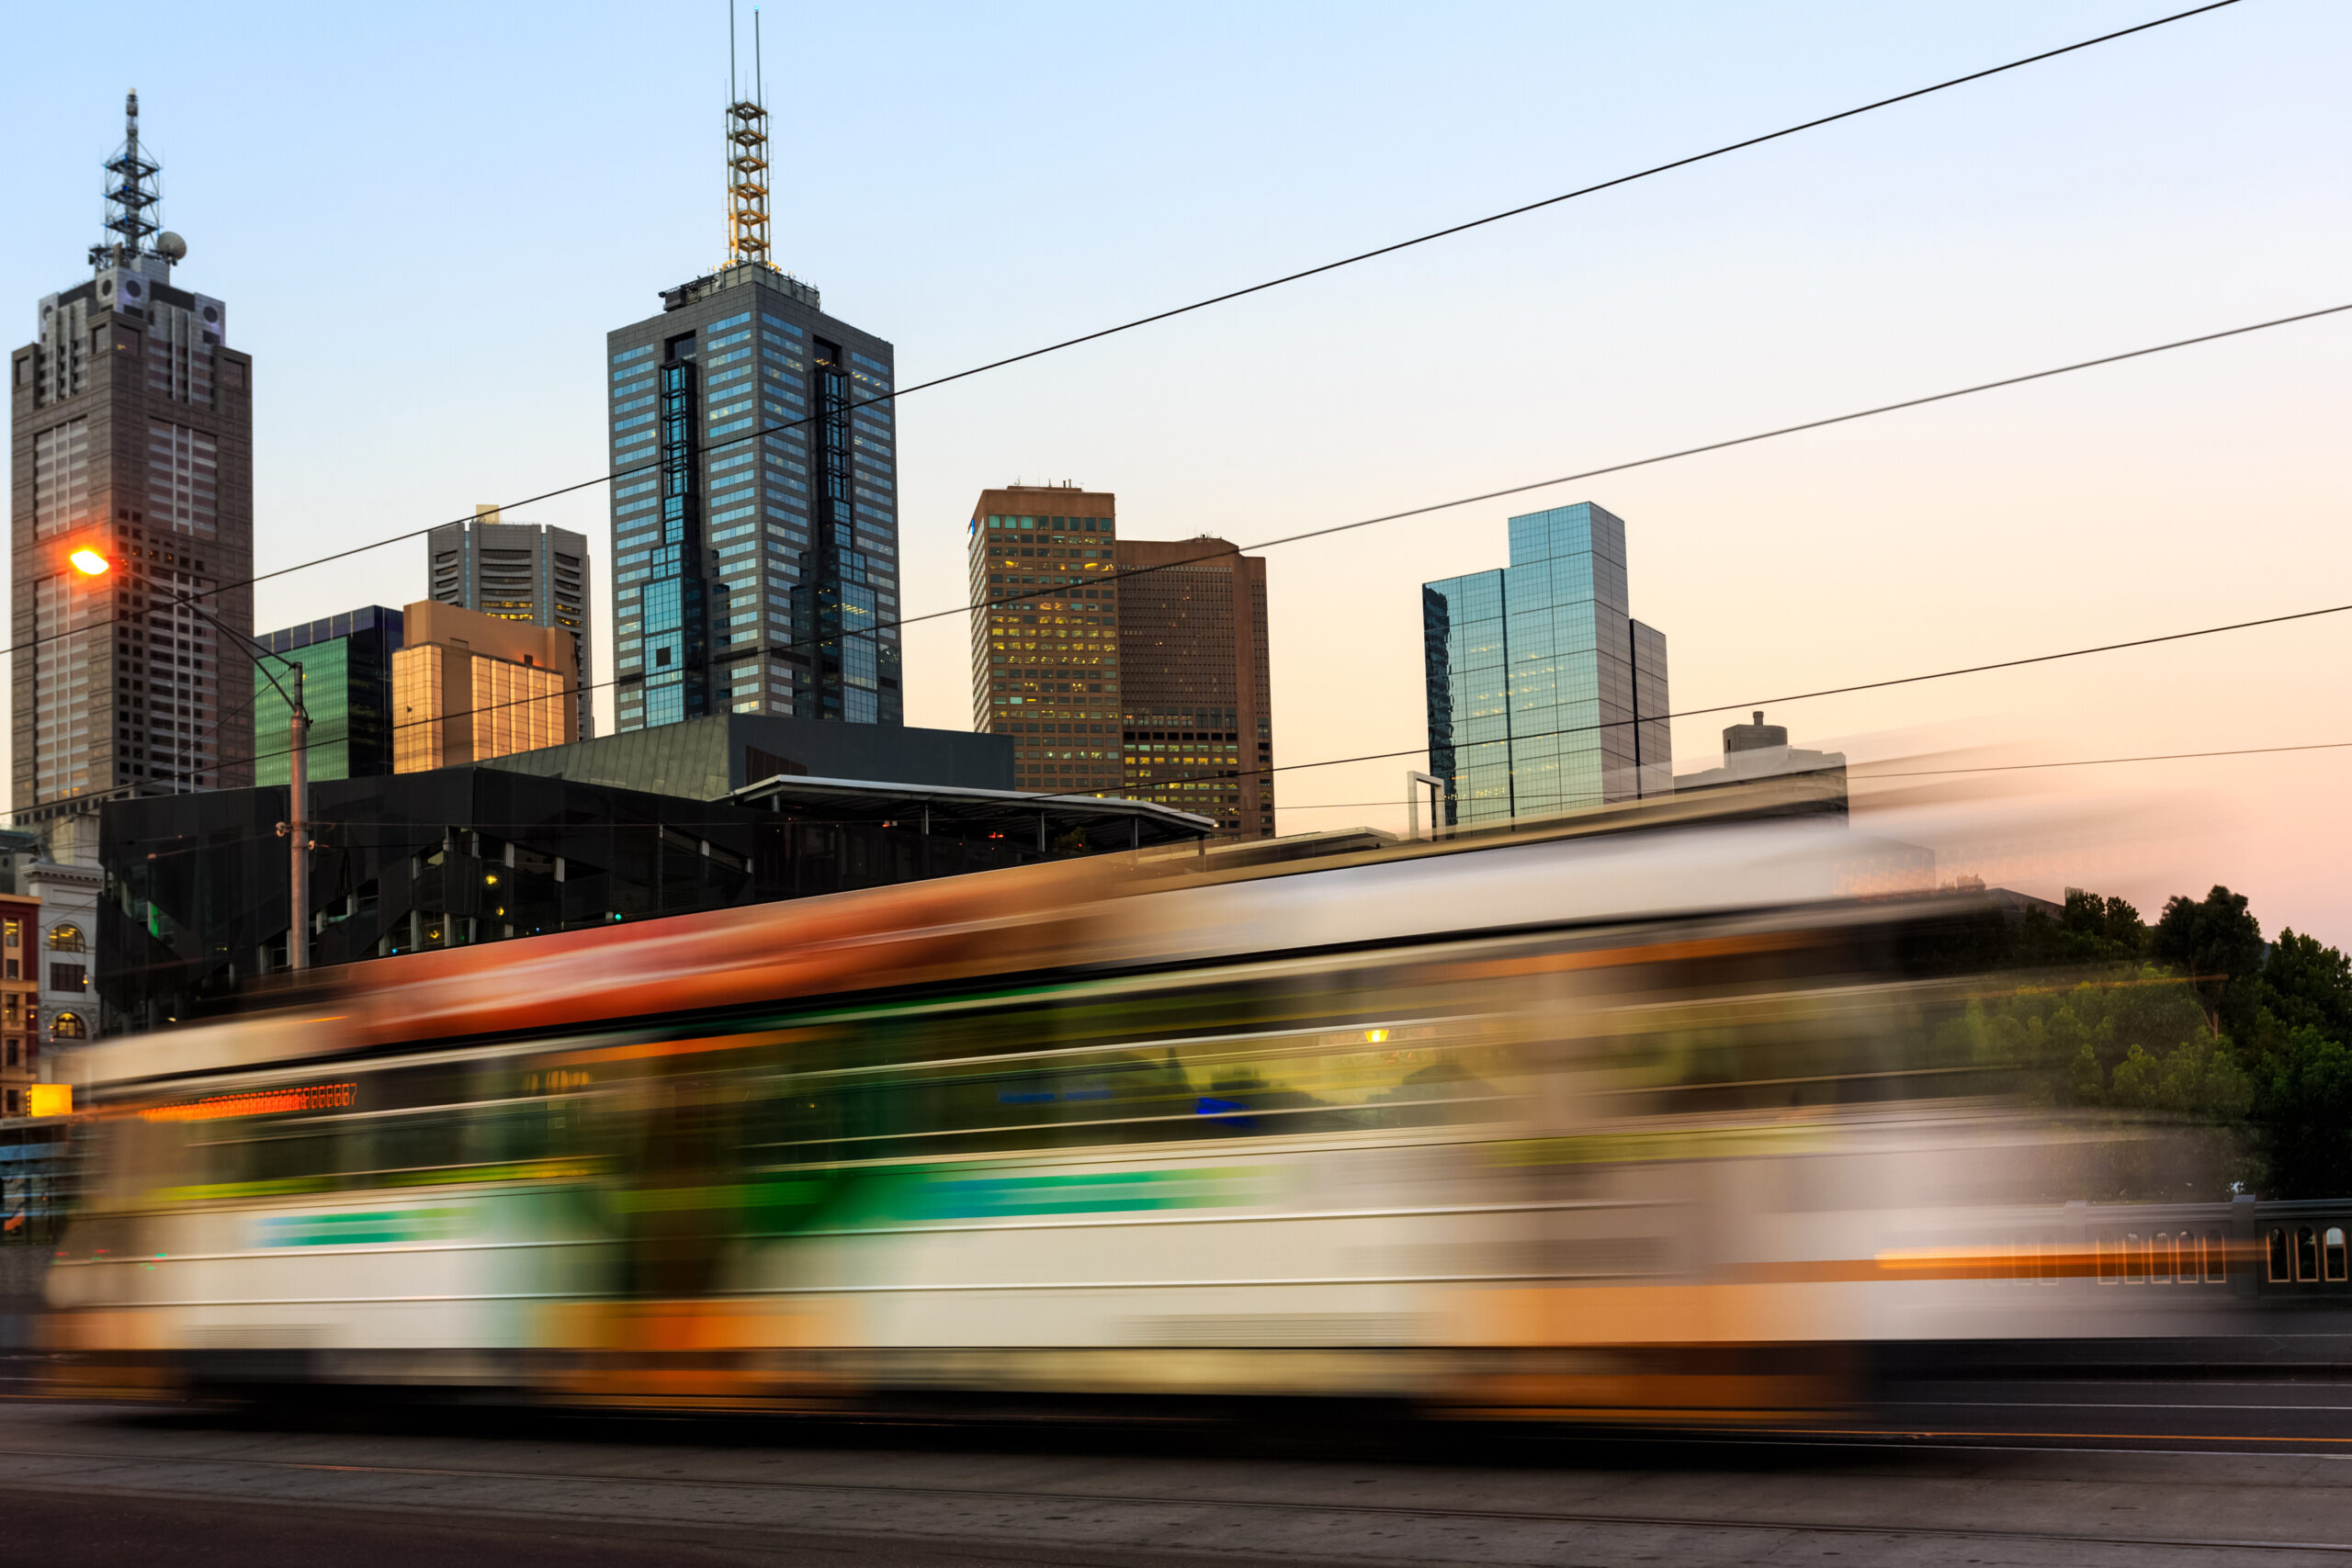 Tram In Motion At Sunset, City Of Melbourne, Australia